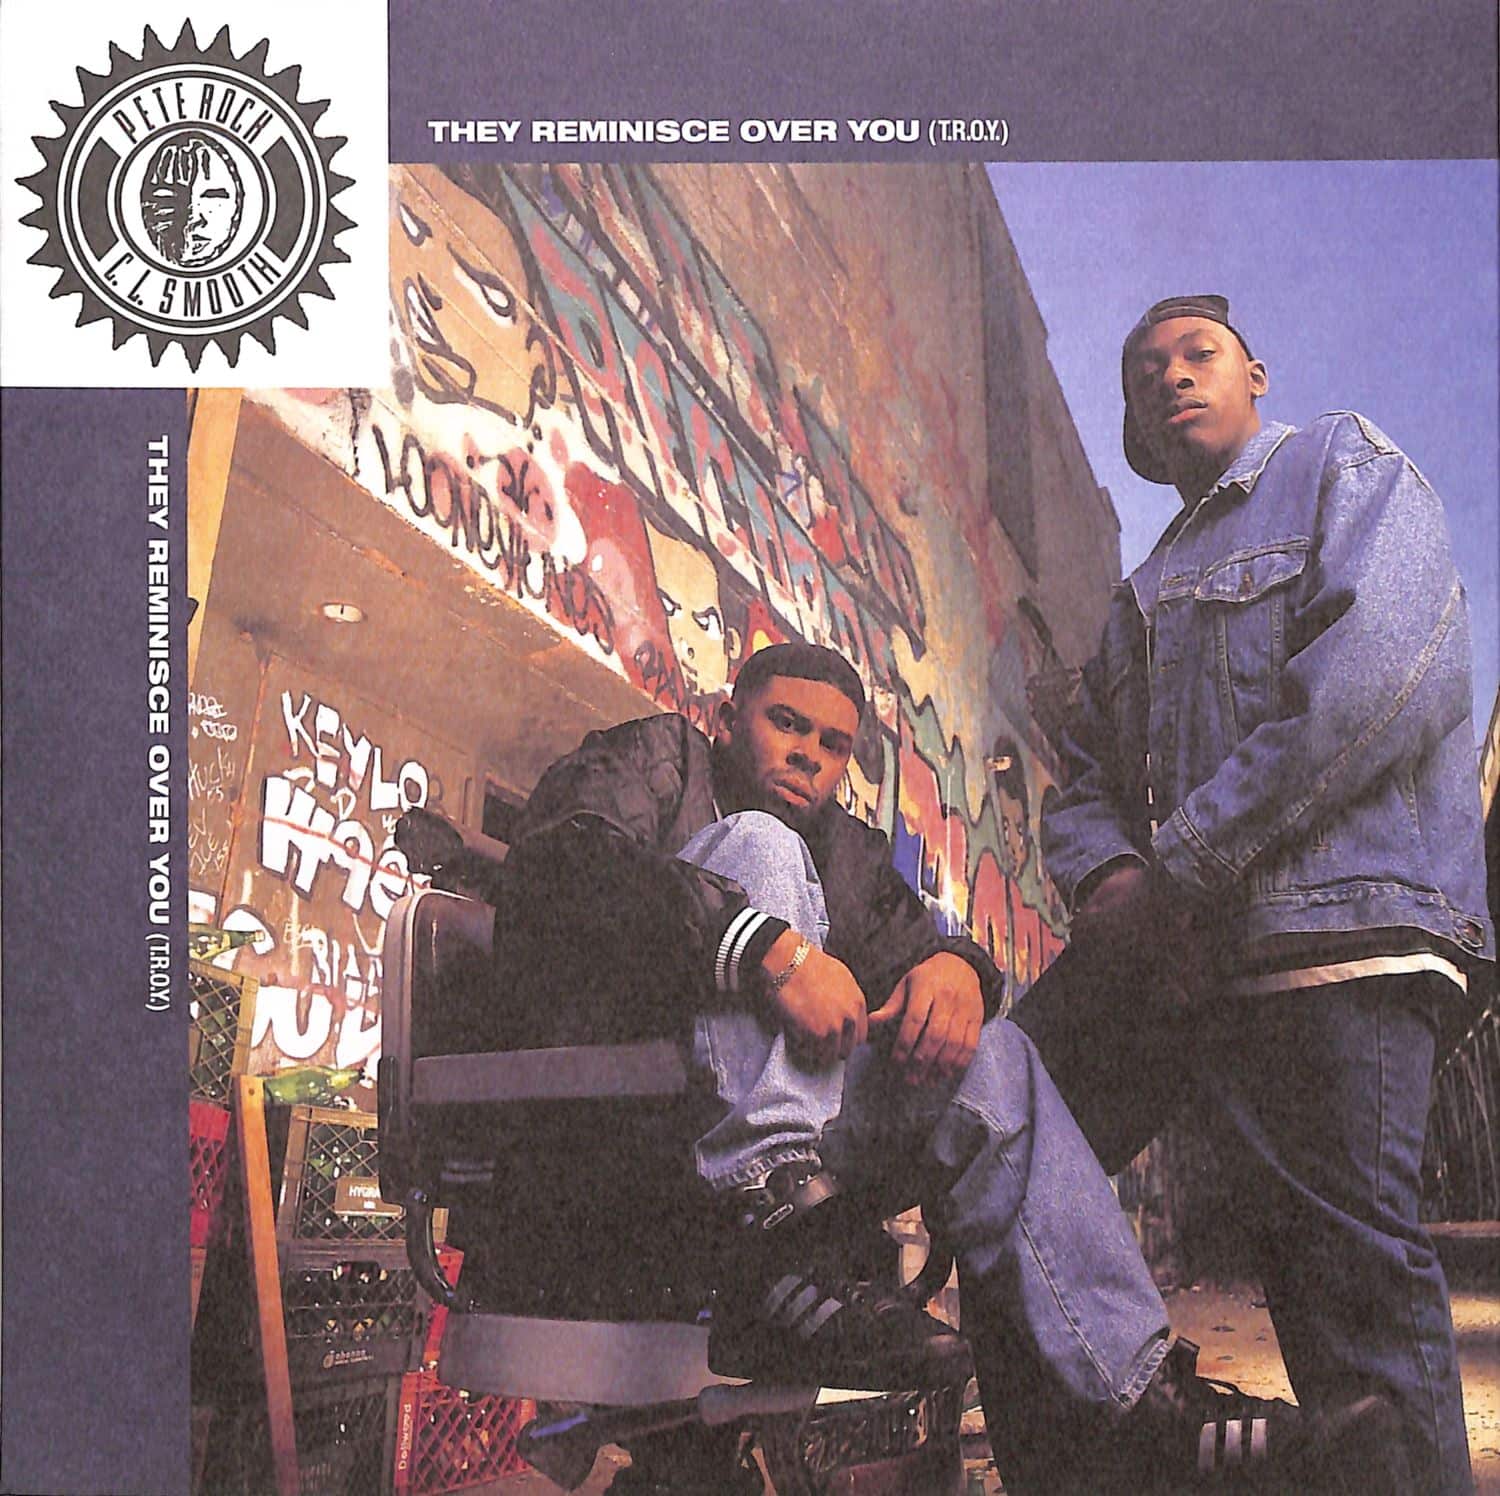 Pete Rock & CL Smooth - THEY REMINISCE OVER YOU/STRAIGHTEN IT OUT 